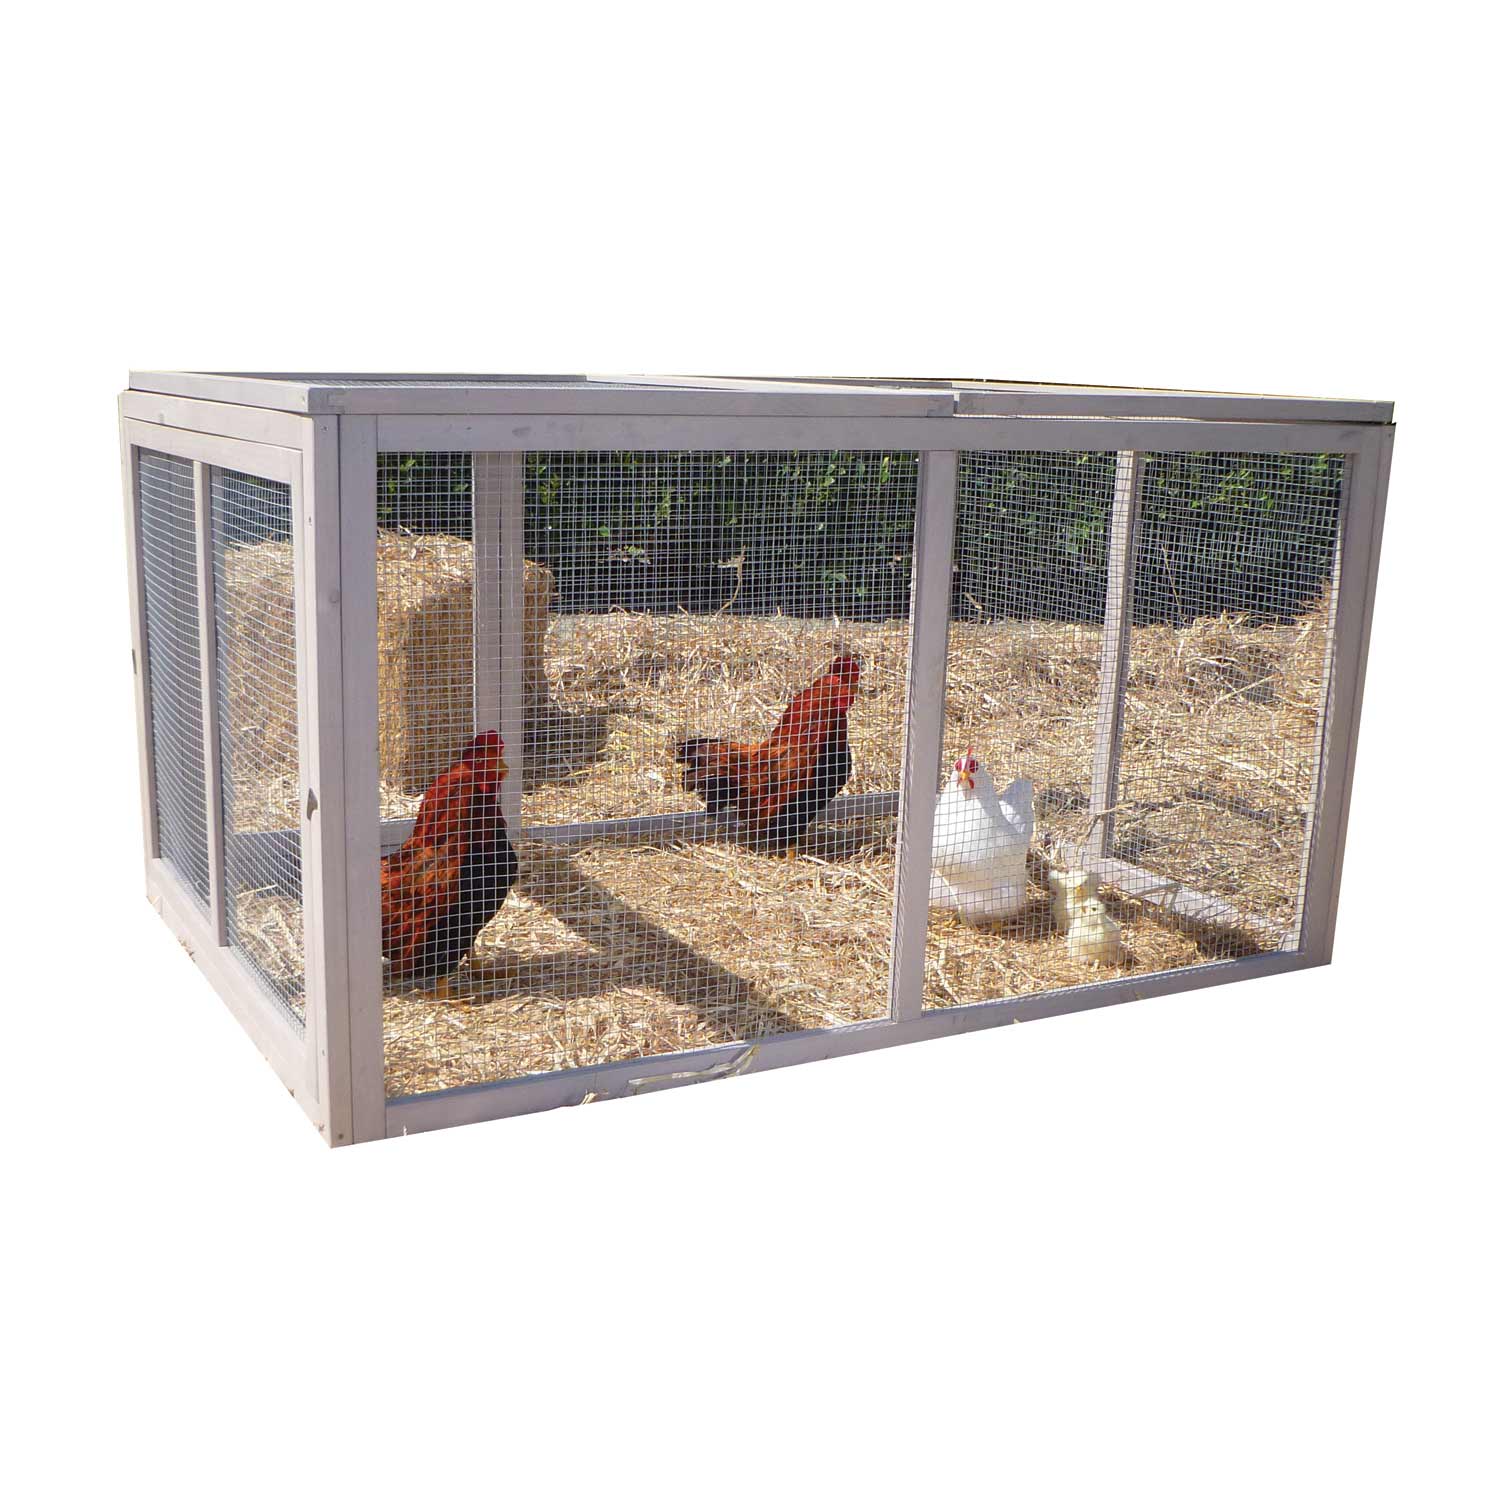 Precision Pet Extreme Hen House Pen in 